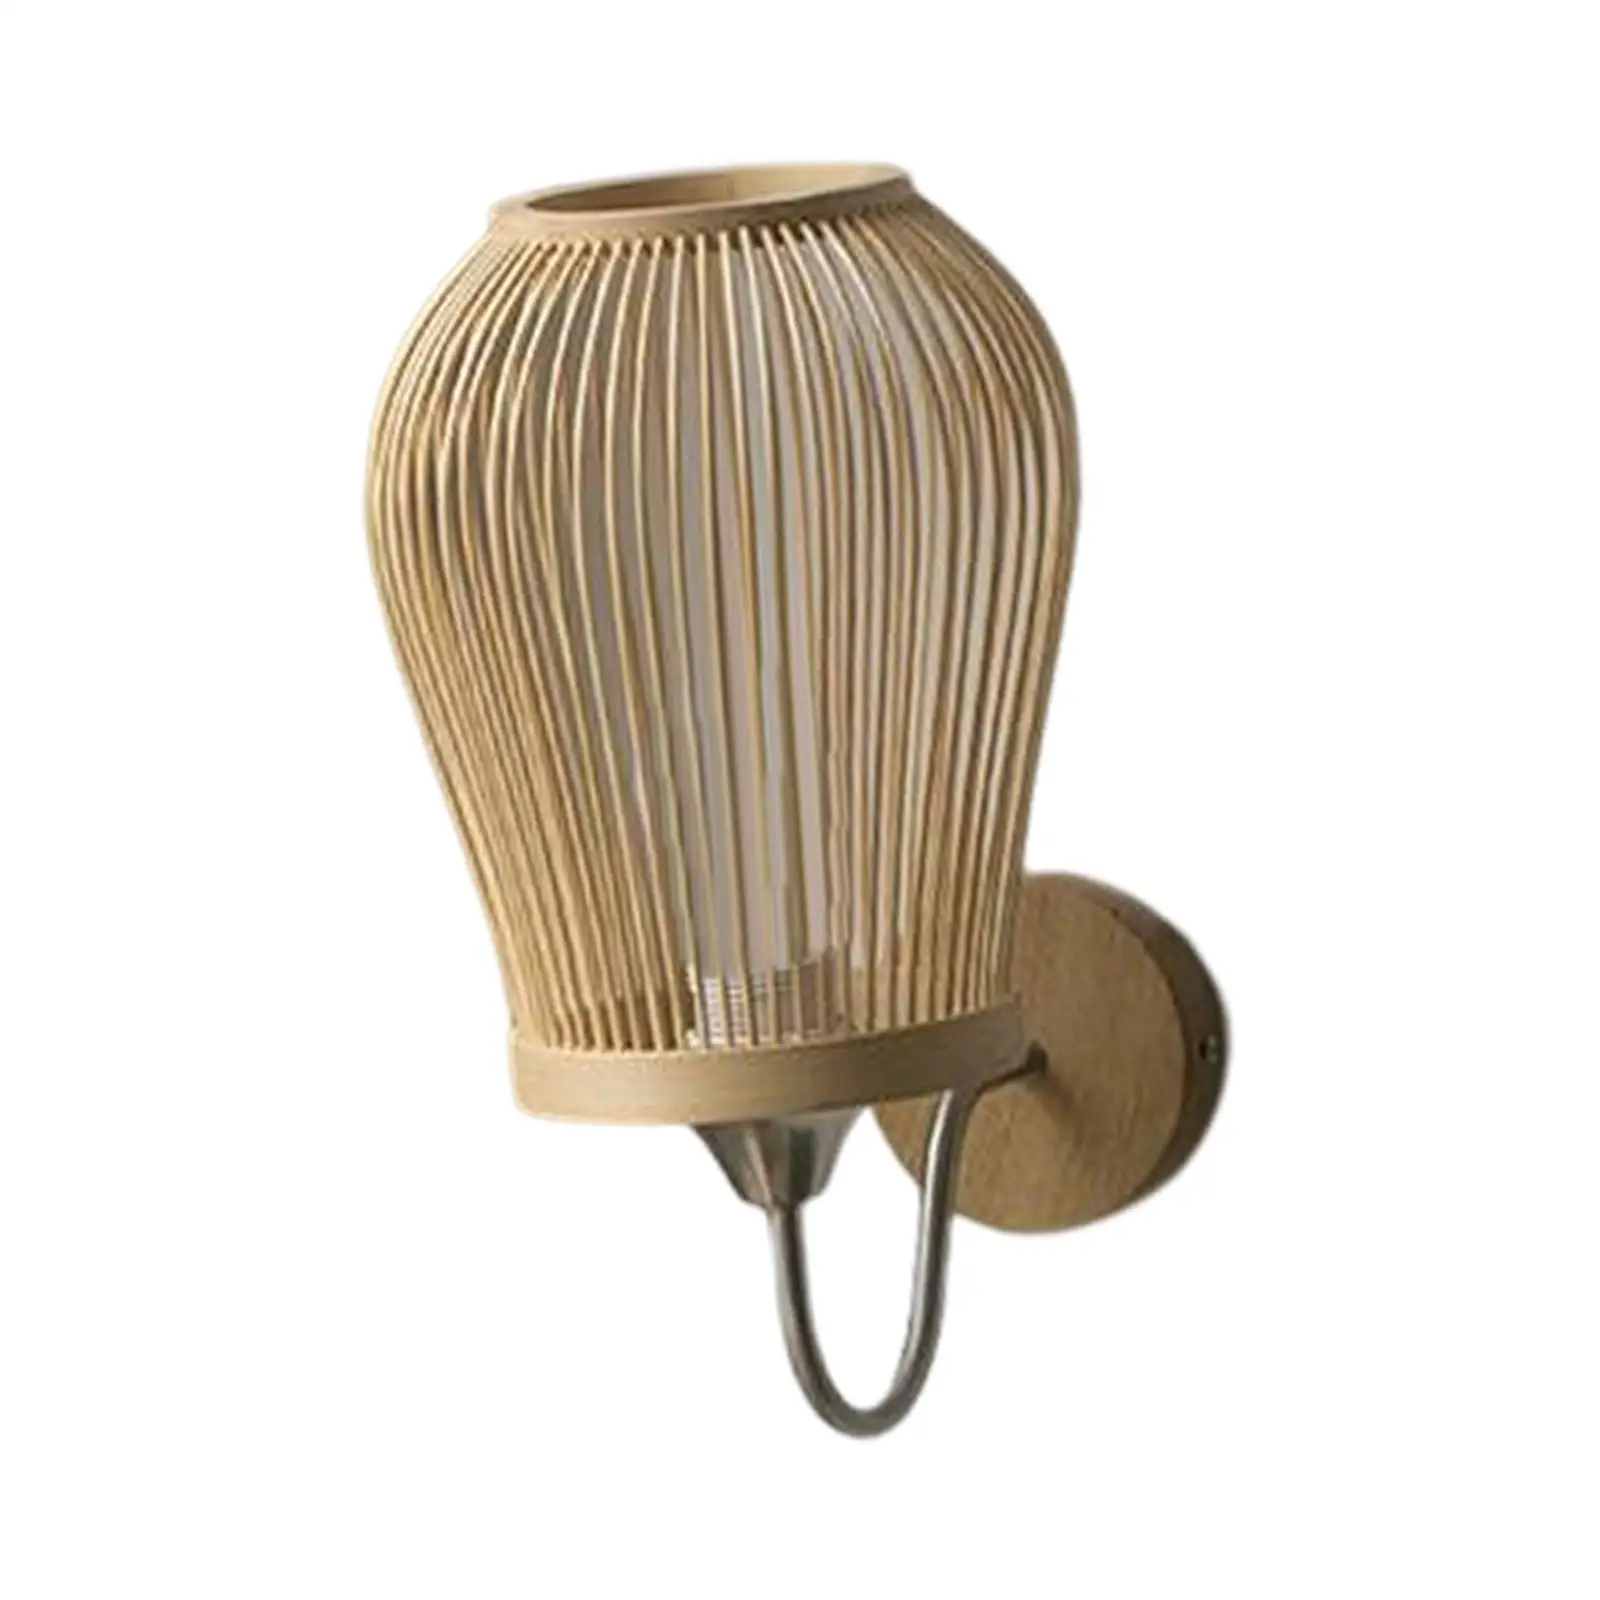 Bamboo Wall Mounted Sconce Lamp Light Lighting Fixture for Room Decor